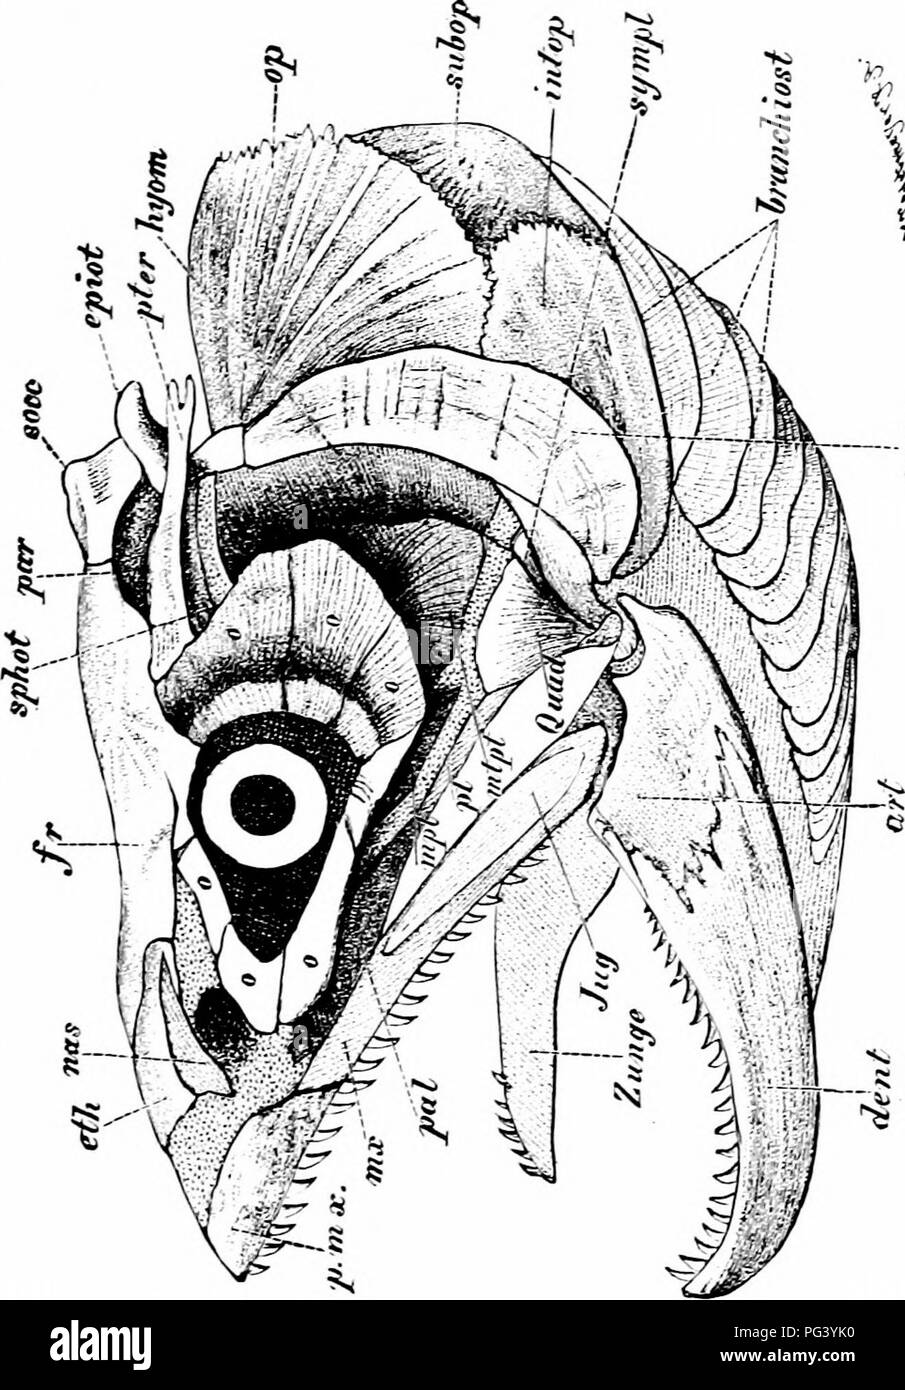 . A manual of zoology. PHYLUM CHORDATA 401 and the latter in Brazil and the Guyanas. Some Teleostomi are toothless, but in most instances teeth are present, and 3 *-&gt; â l^ili- s 5 T^ â 7 ^ t ^ % ?4 o-H-Â° J /  S 2 a 0$ Â«: V â &quot;;&quot;--Vy^ ^J*&quot; - u &gt;, mmW ,t.. - &gt;!* â¢^ *&quot; &quot;&quot; Â« *C ^M â . , : f i&gt;â&quot;3 o.'S' %Â« 8n r^t =^&amp; Â£ â¢ *Â» IT c S i- - i ** â = E &quot;â&quot;3. may be of the developed, not only on the pre-maxilla and maxilla upper jaw, and the dentary of the lower, but on a 2 L&gt;. Please note that these images are extracted from scan Stock Photo